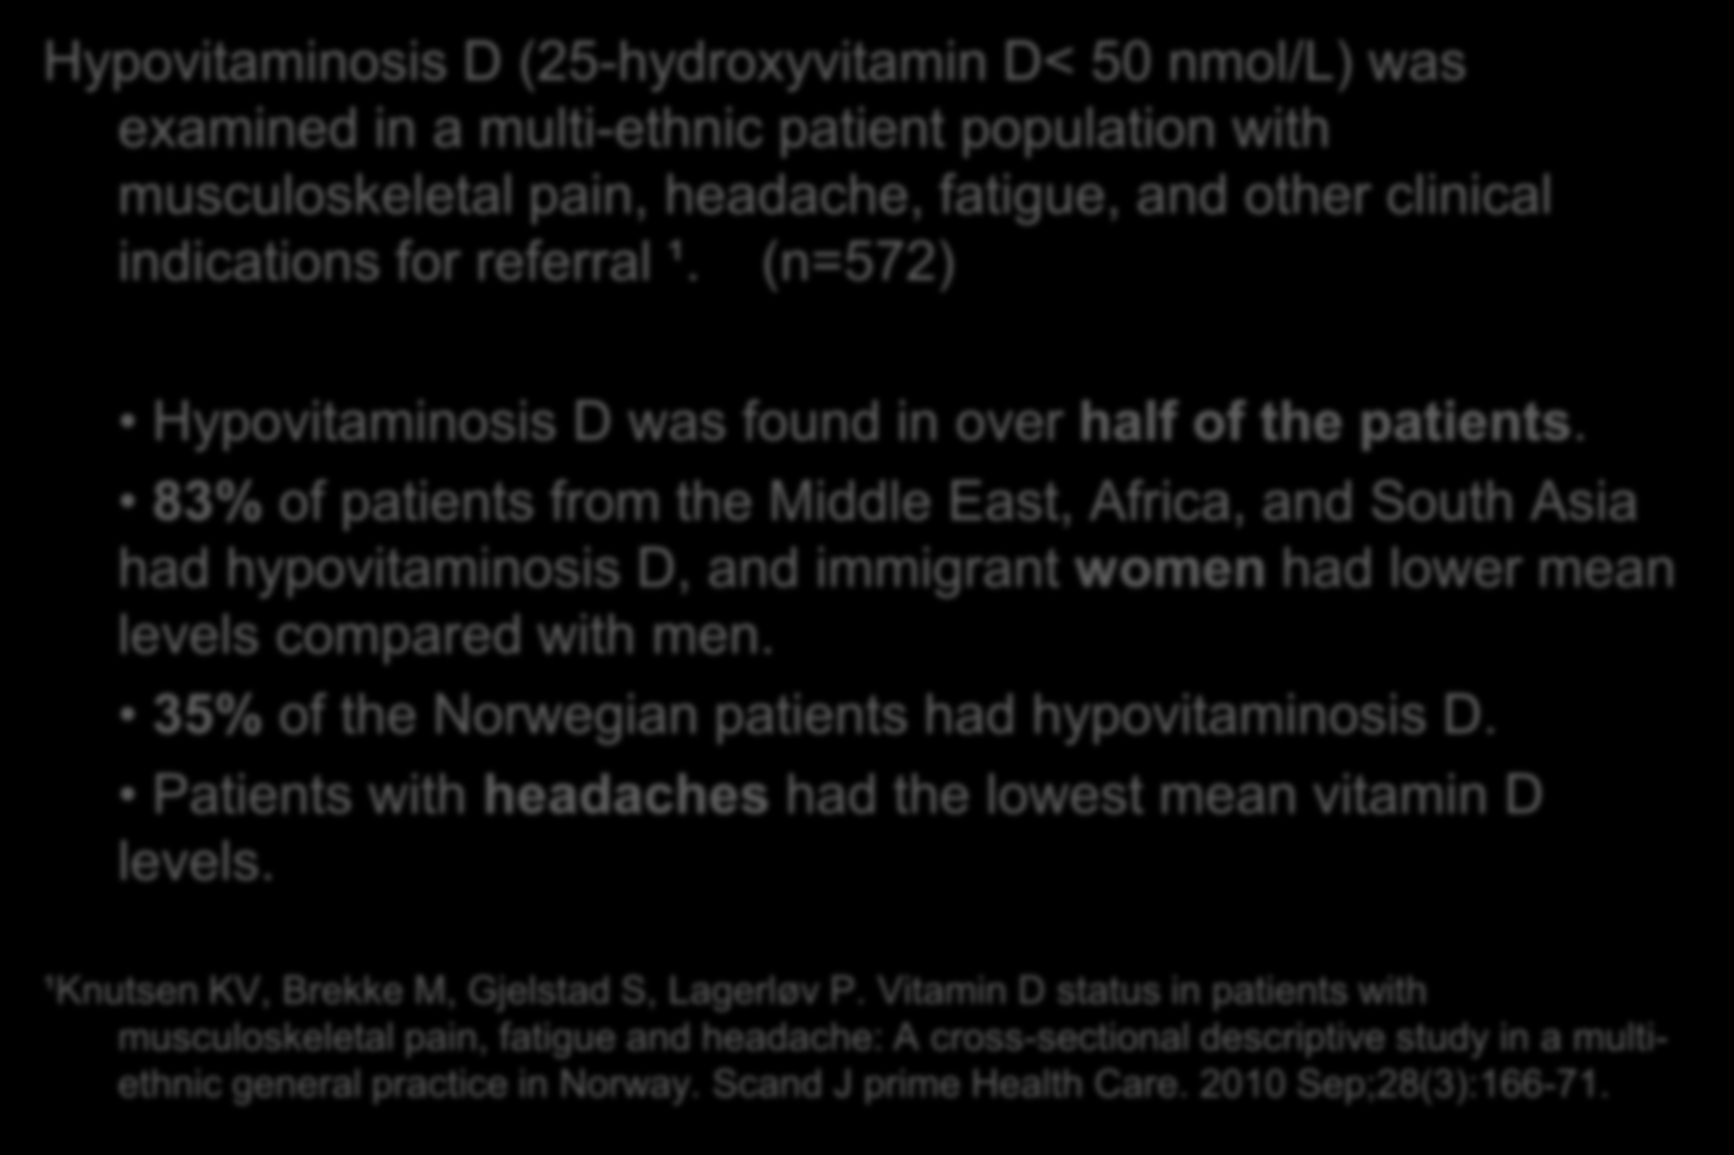 Romsås Legesenter 2005-2007 Hypovitaminosis D (25-hydroxyvitamin D< 50 nmol/l) was examined in a multi-ethnic patient population with musculoskeletal pain, headache, fatigue, and other clinical